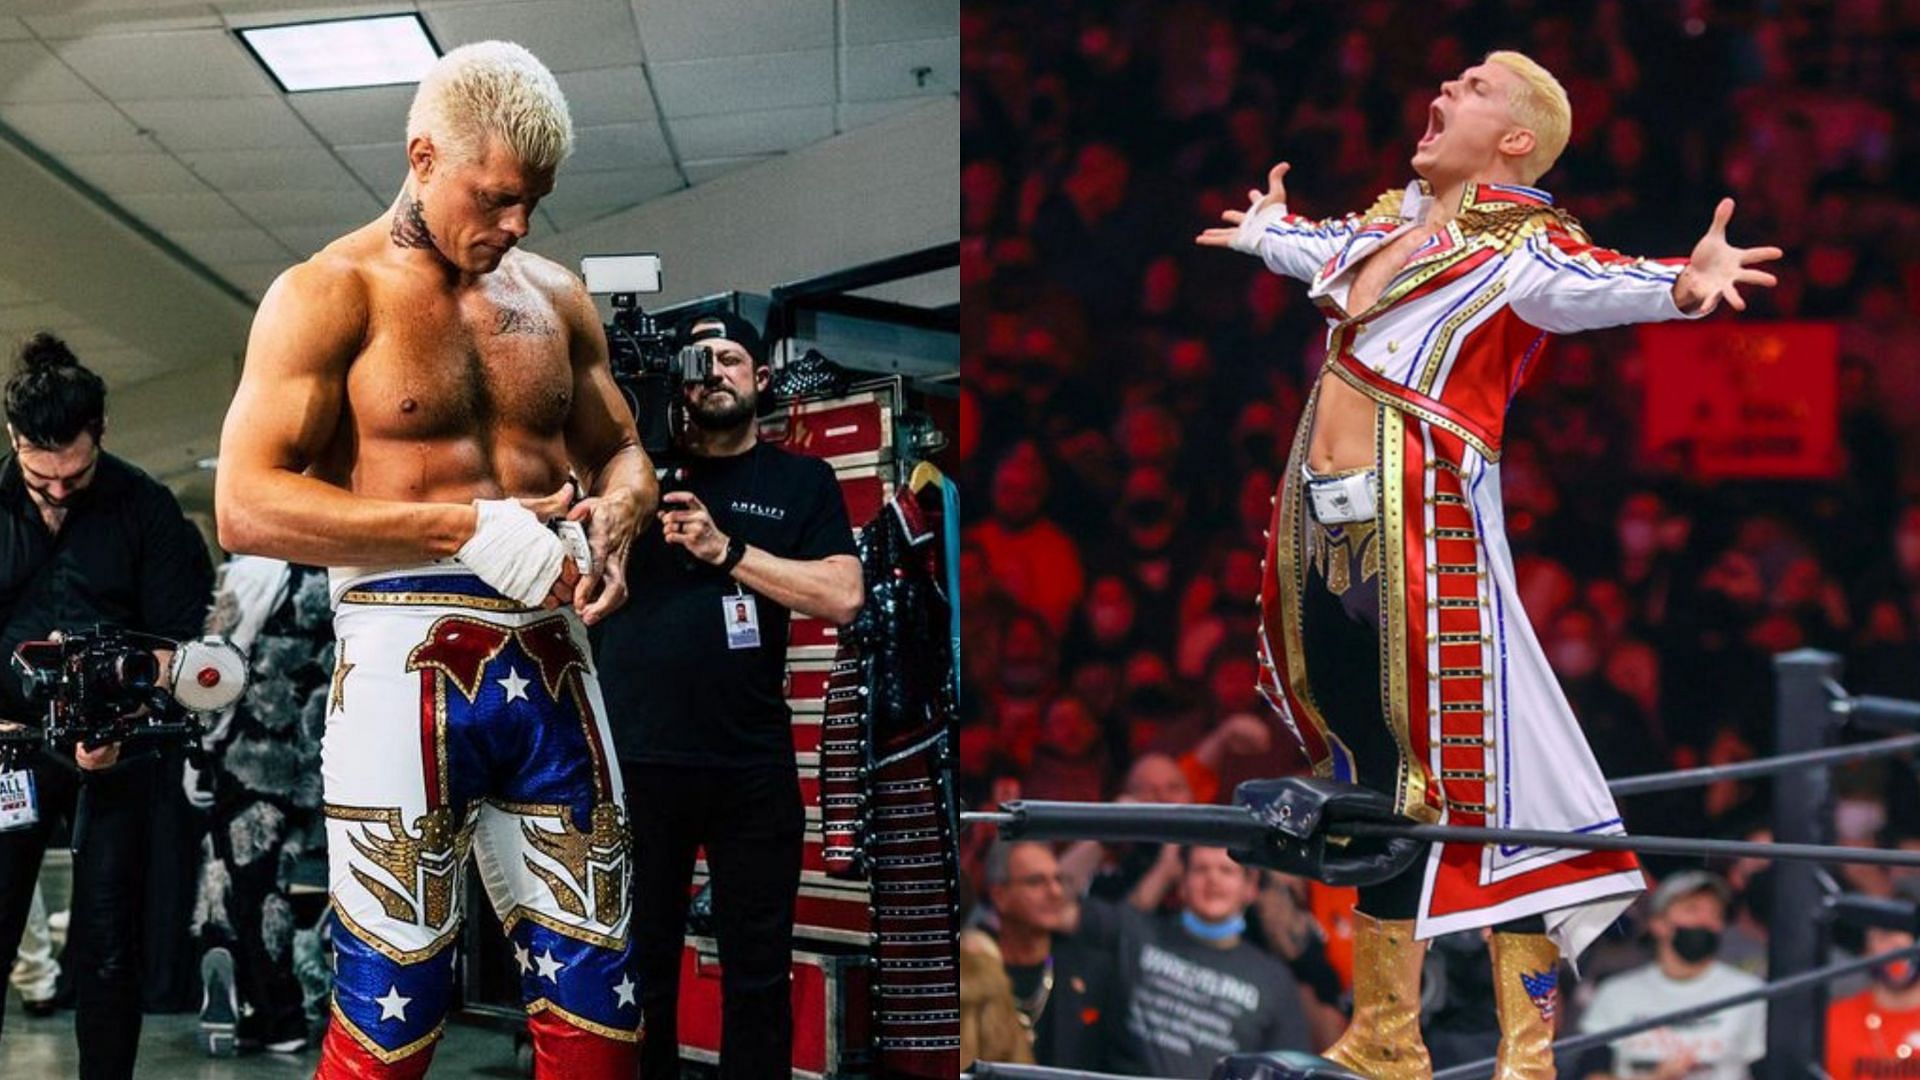 Cody Rhodes returned to WWE in April 2022